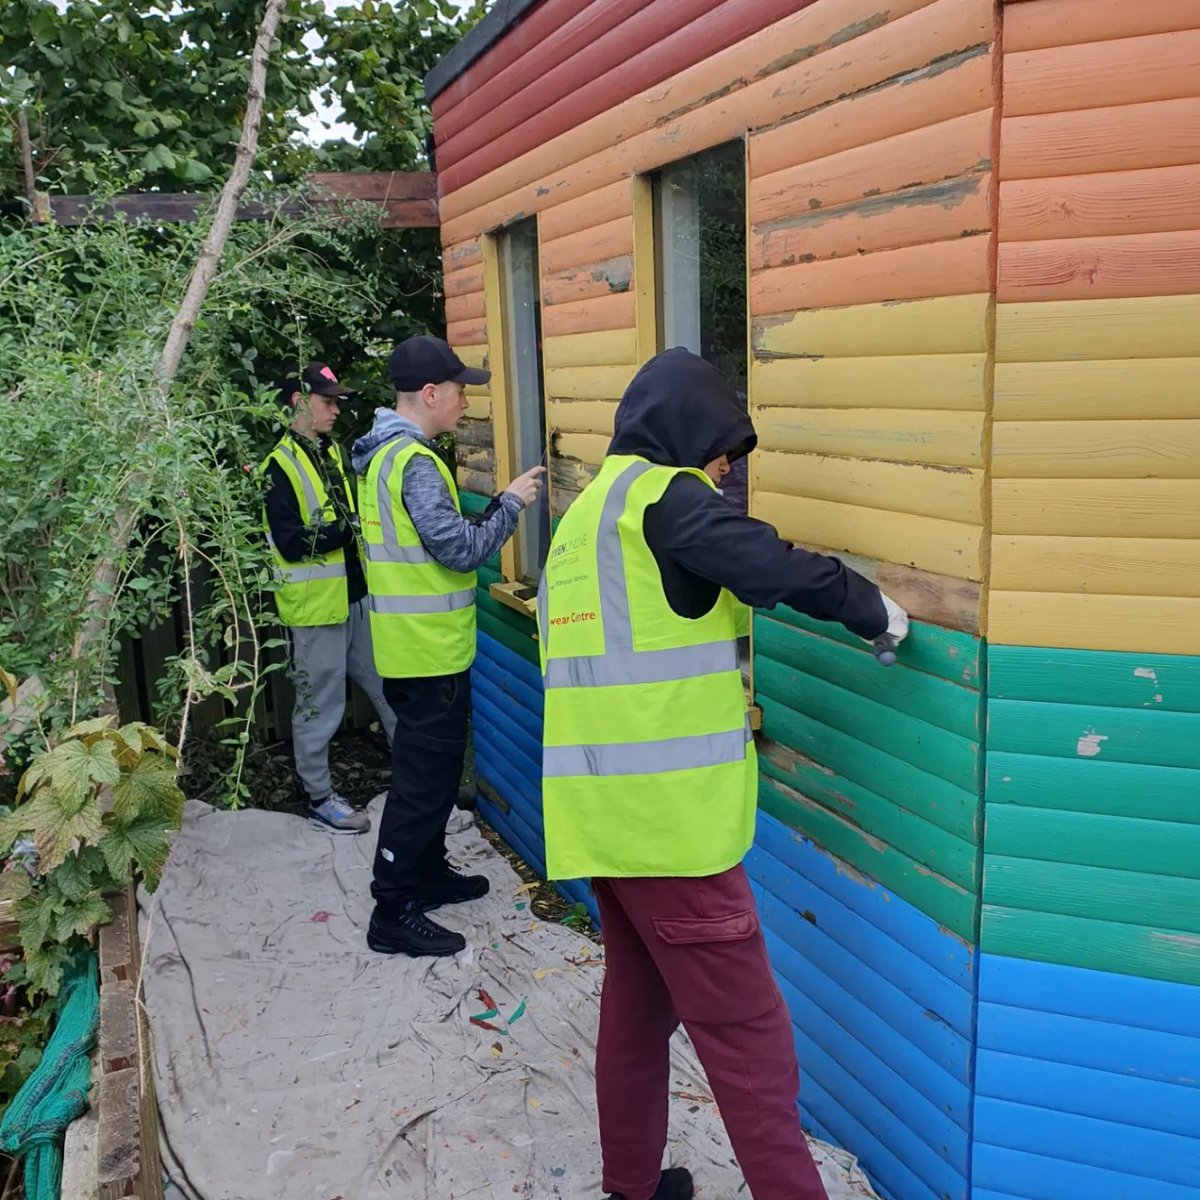 Good to see some of our mixed school group hard at work helping the Maxwell center, tasks include preparing the shed and bench for painting 🎨 @ActiveSchAngus @AngusCouncil @apprentice_scot @CITB_UK @ColemanDundee @dundee_angus @DundeeCouncil @shewittDA @ShonaRobisonMSP @Rockwell